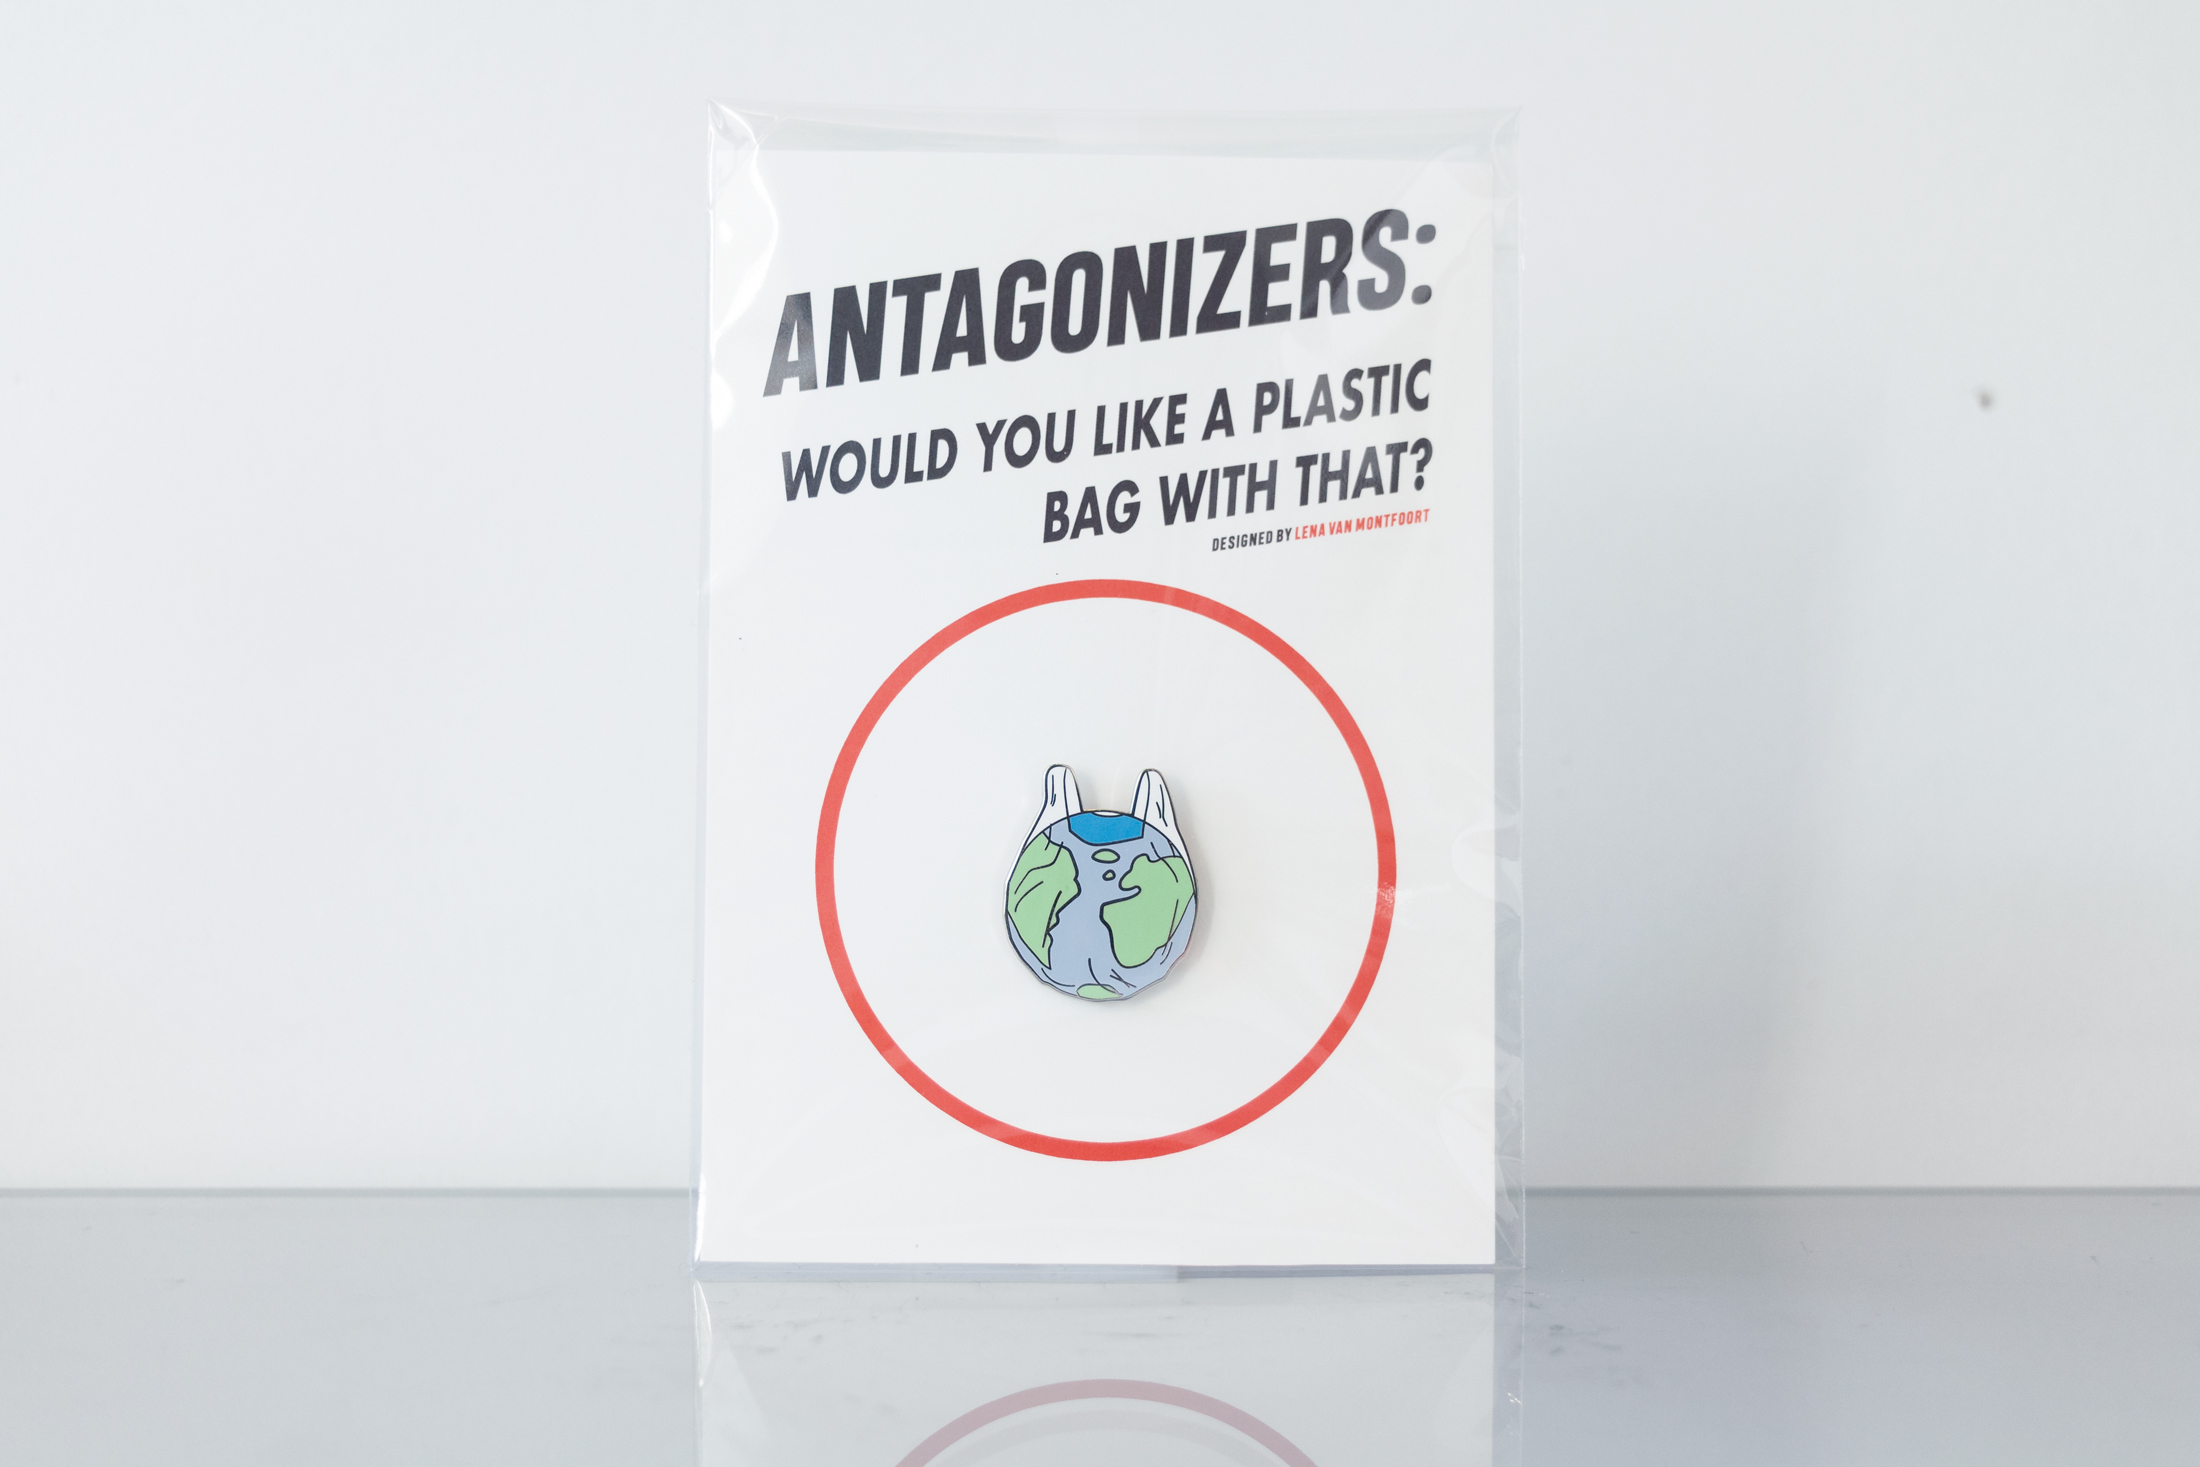 Antagonizers: Would you like a plastic bag with that?